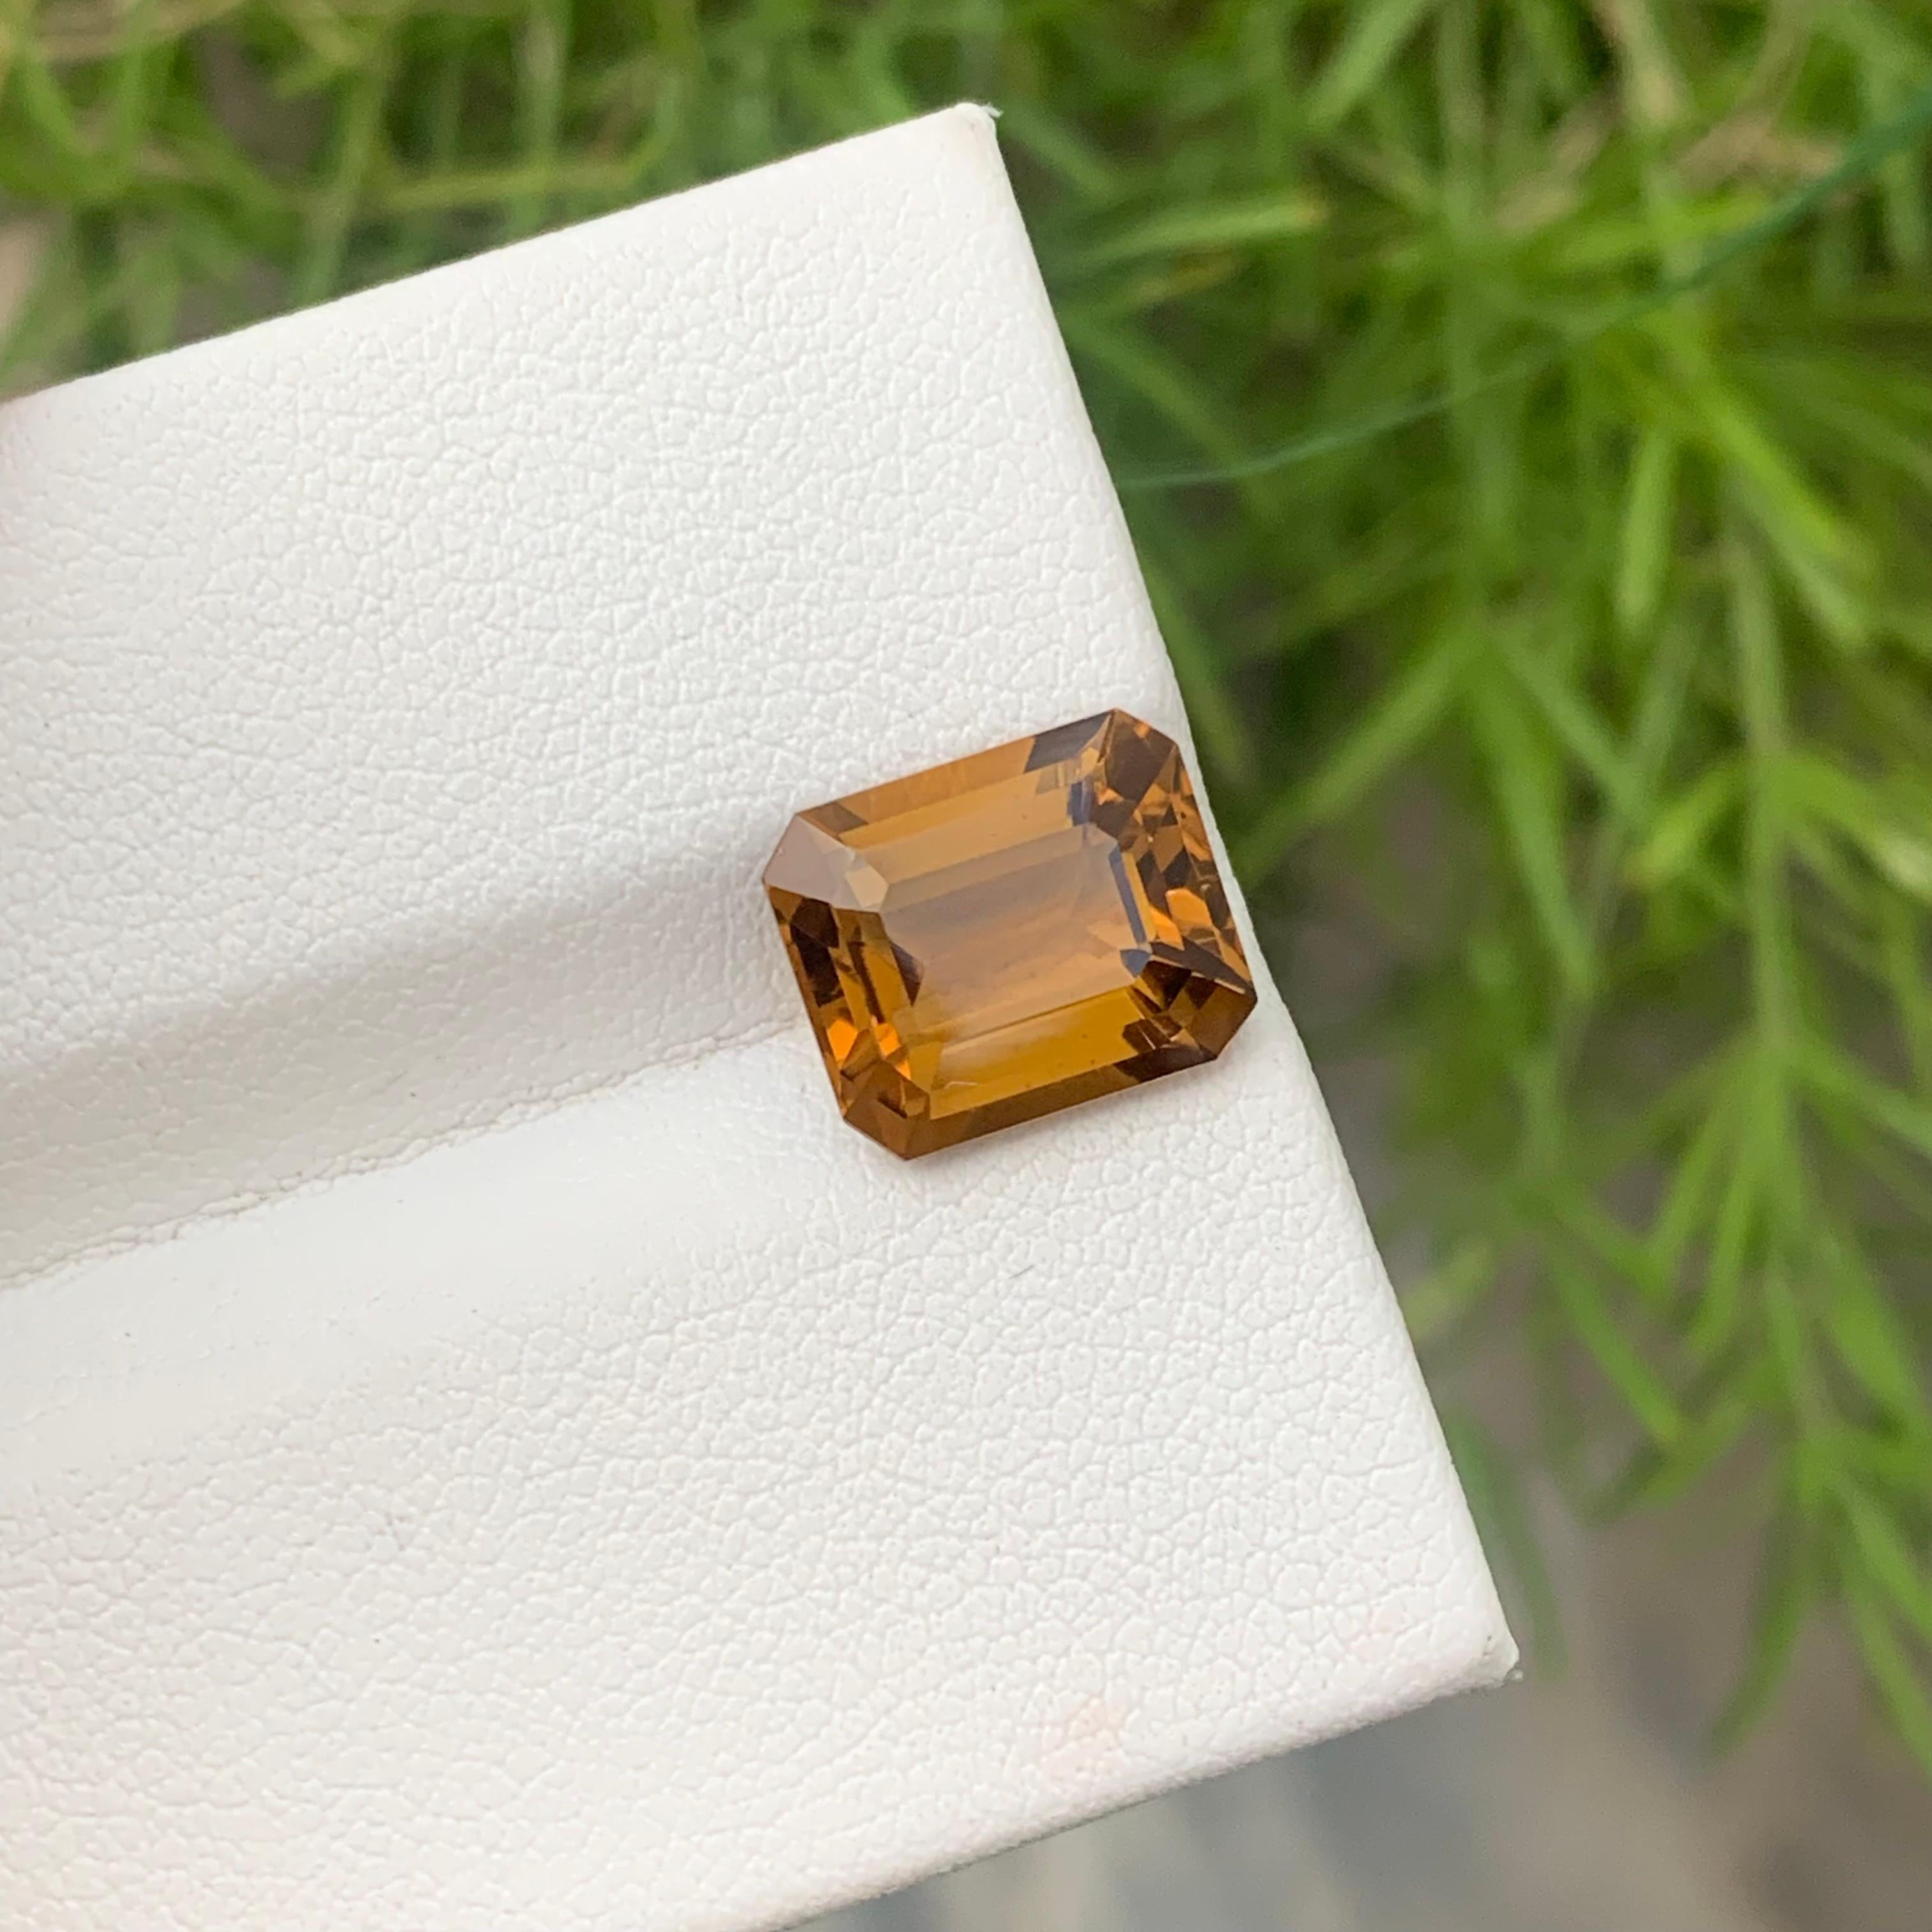 4.20 Carat Natural Loose Citrine Honey Color from Brazil Emerald Cut Gemstone For Sale 3